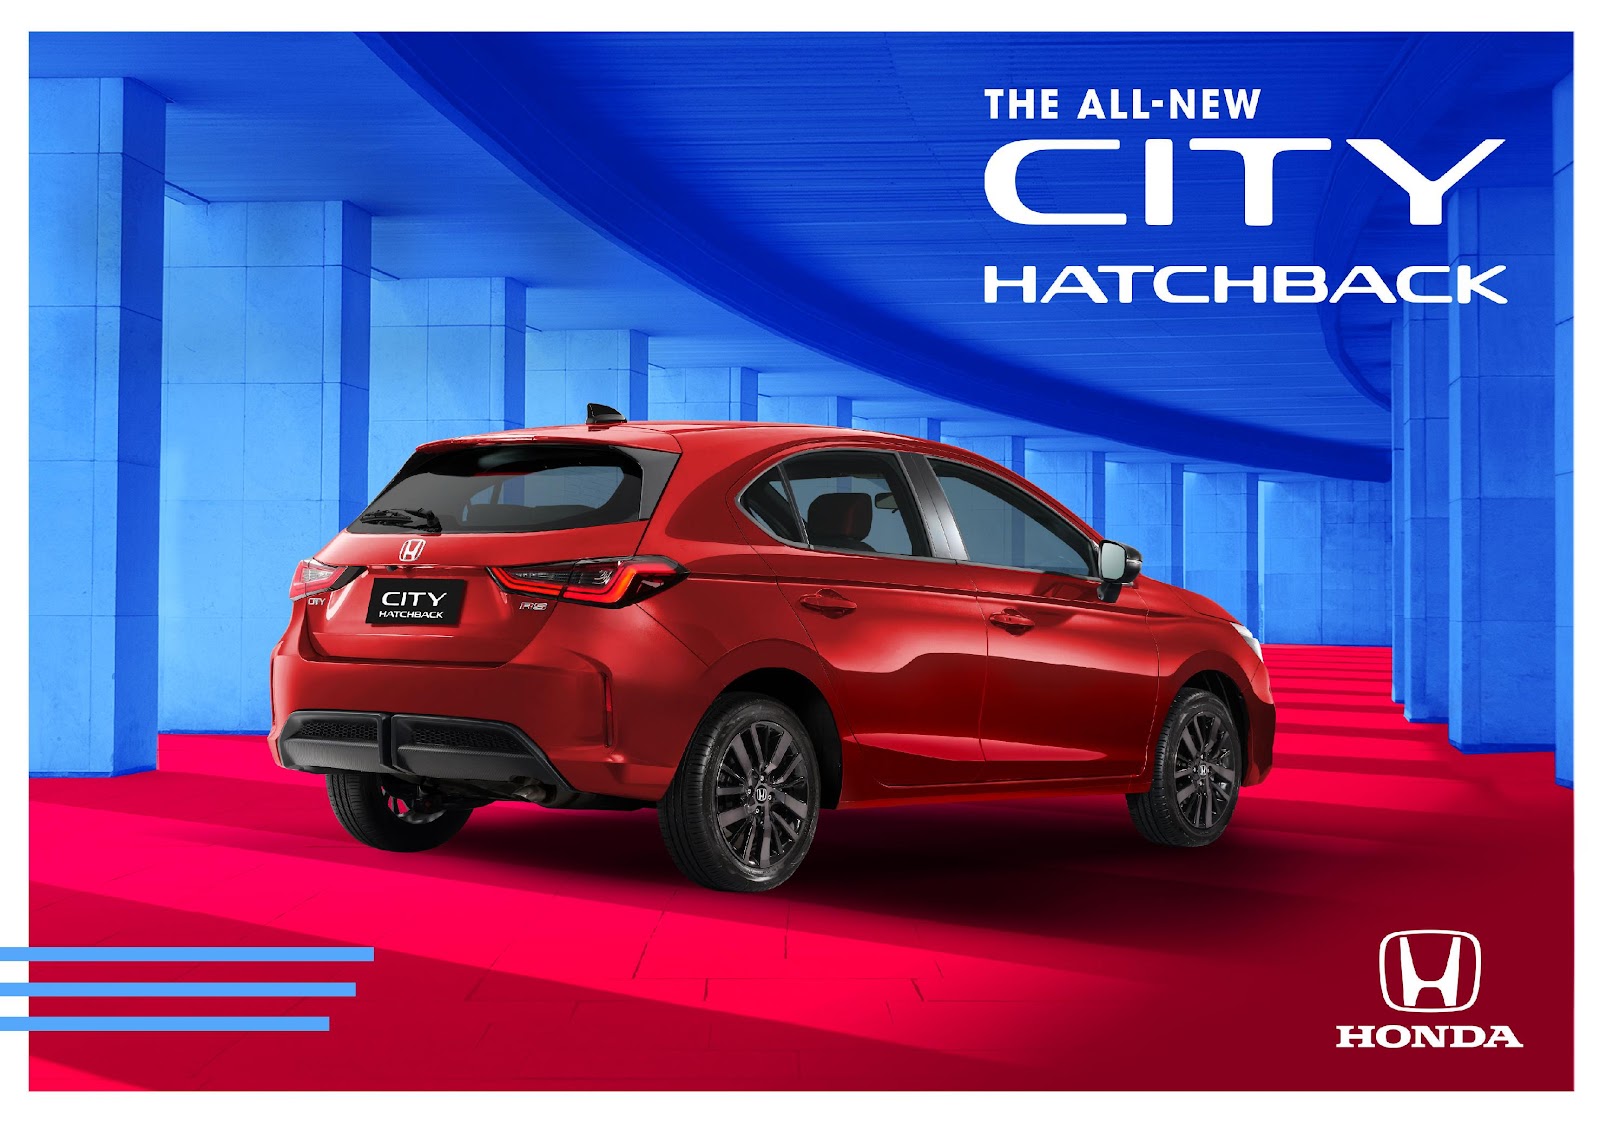 C:\Users\bc152994\Desktop\2TG 5D Launch\Support Photos\Support Photo - Honda officially launches the All-New Honda City Hatchback in the Philippines.jpg